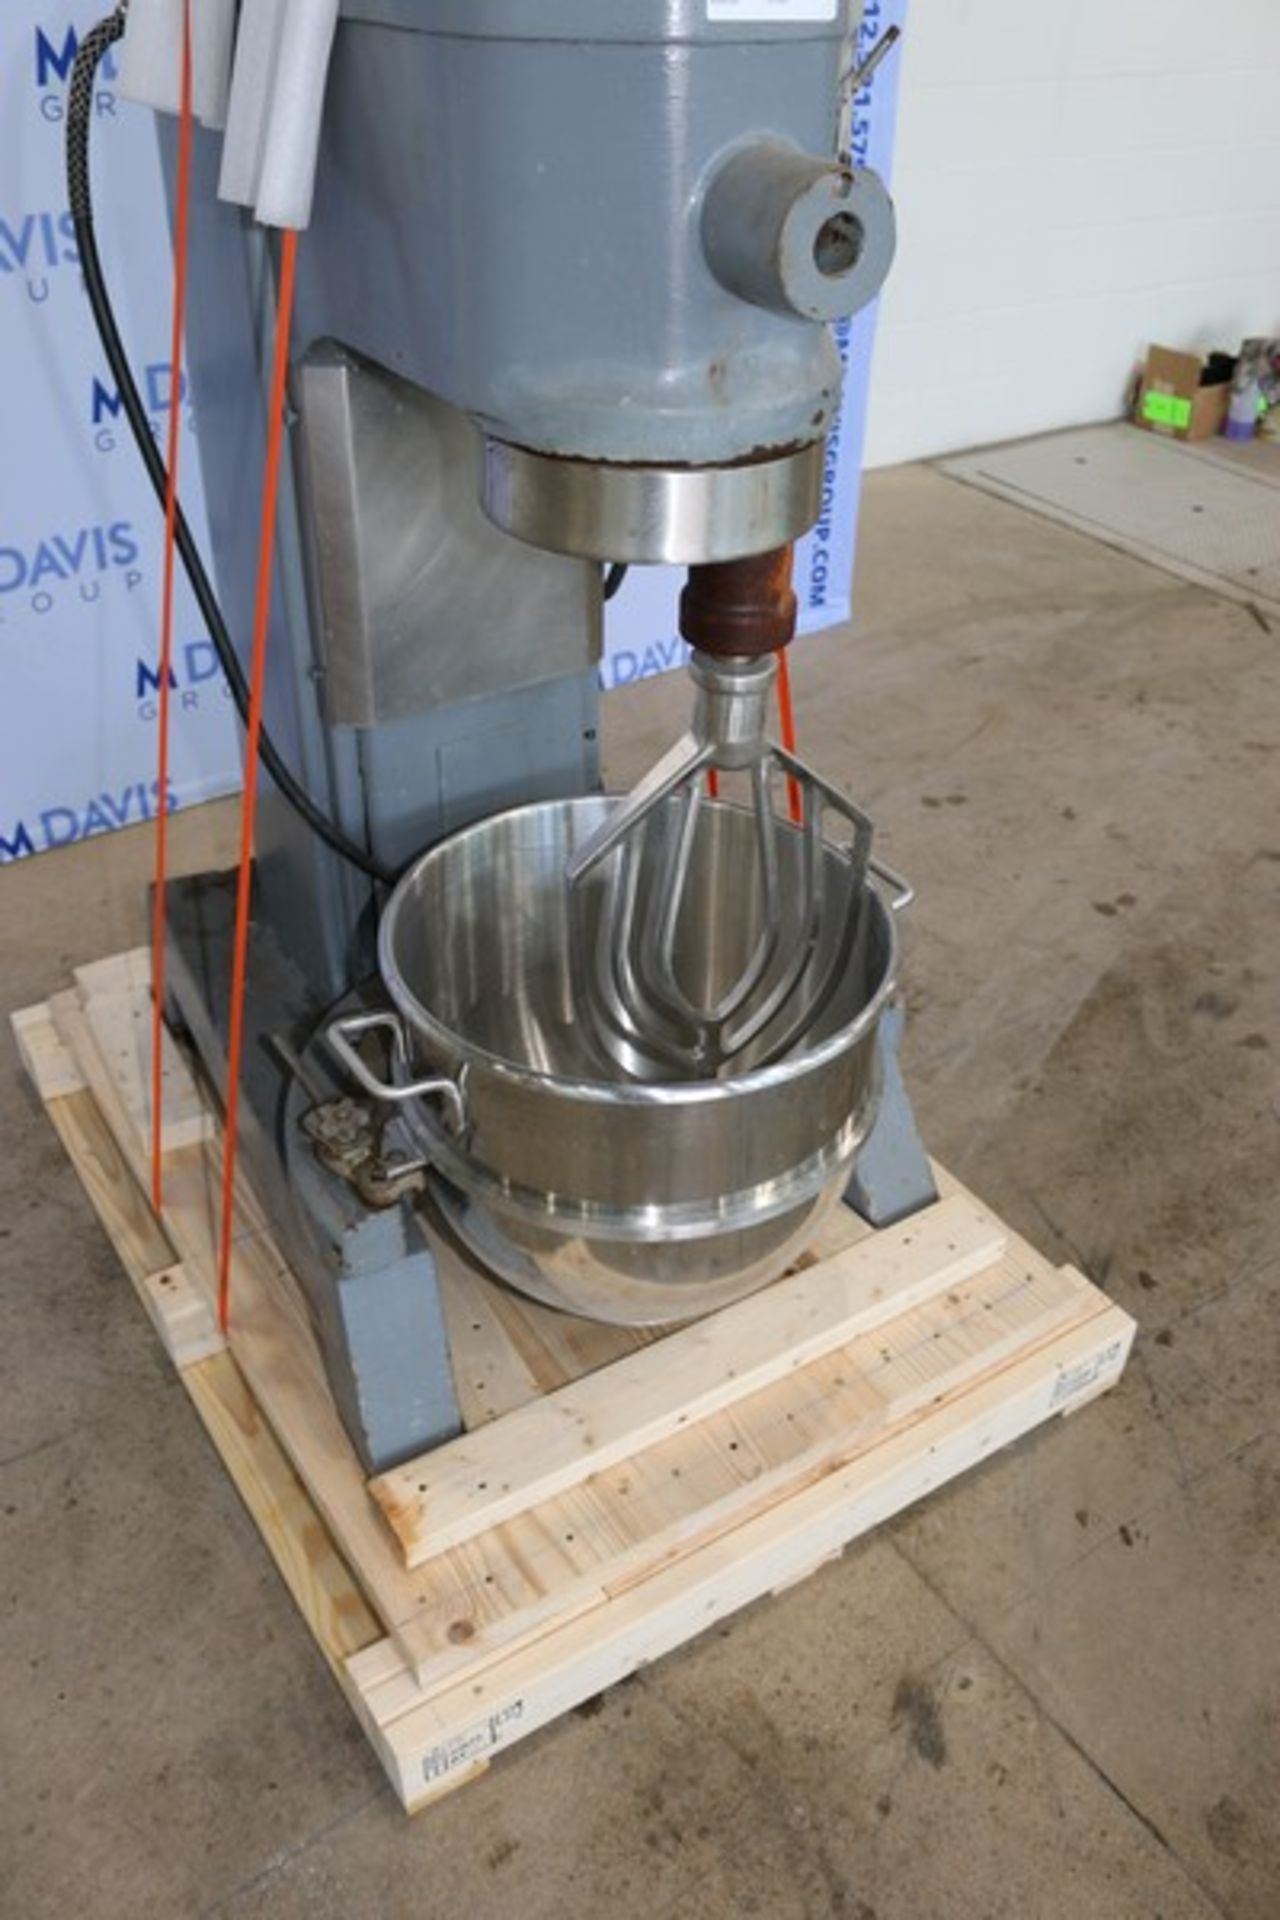 Hobart Mixer,-M/N L-800, S/N 11-213-617, 200 Volts, 1725 RPM Motor, with 1-1/2 hp Motor, with S/S - Image 3 of 6